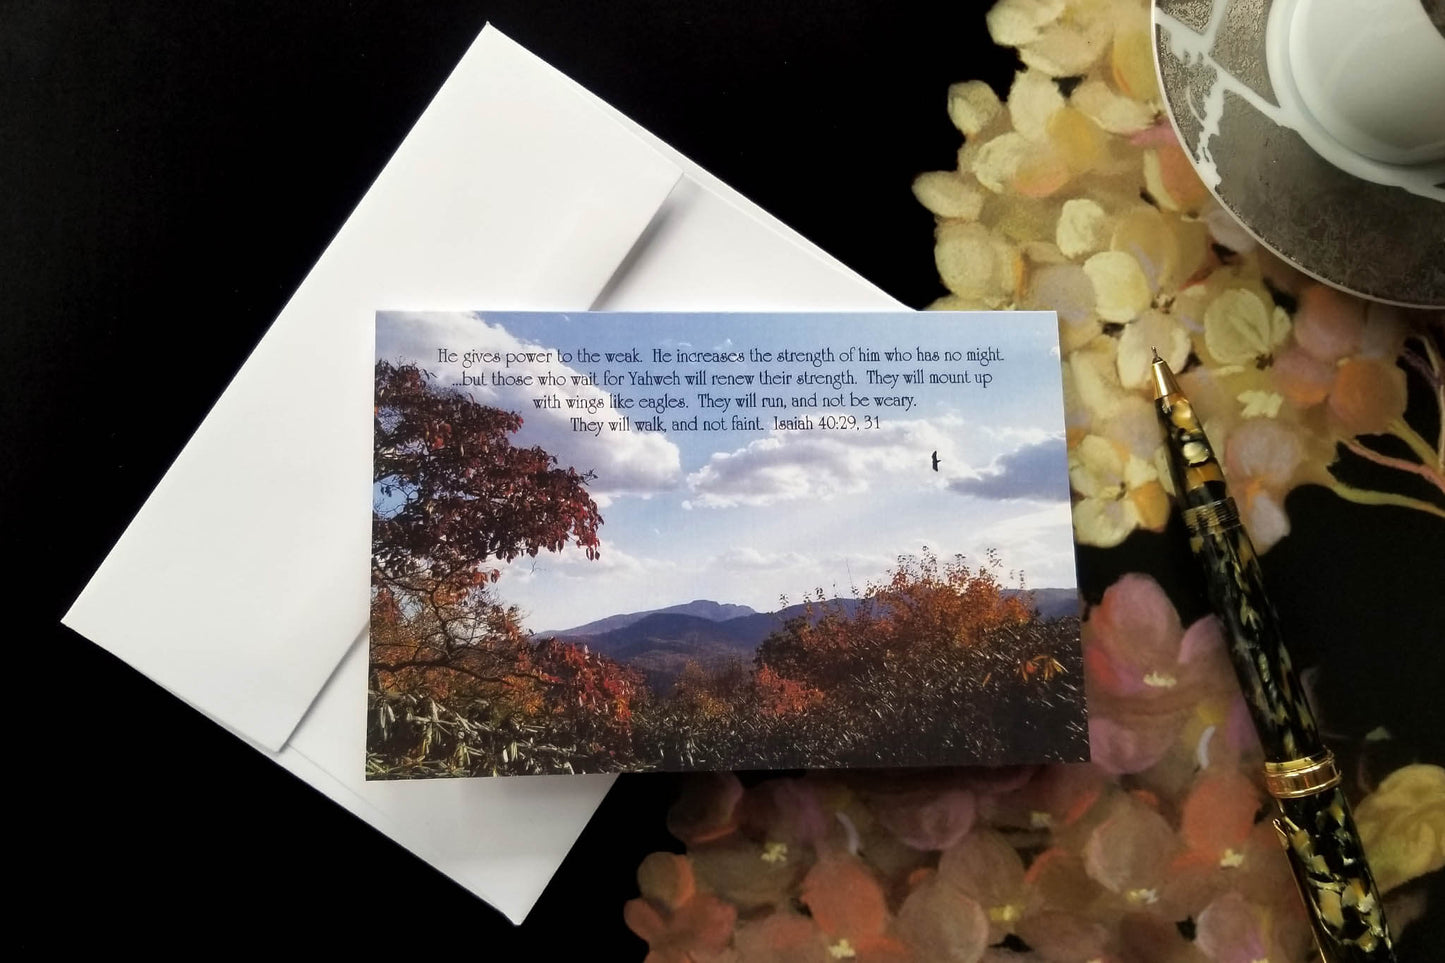 Isaiah 40:29, 31 Fall Flight Over Grandfather FW Christian greeting card